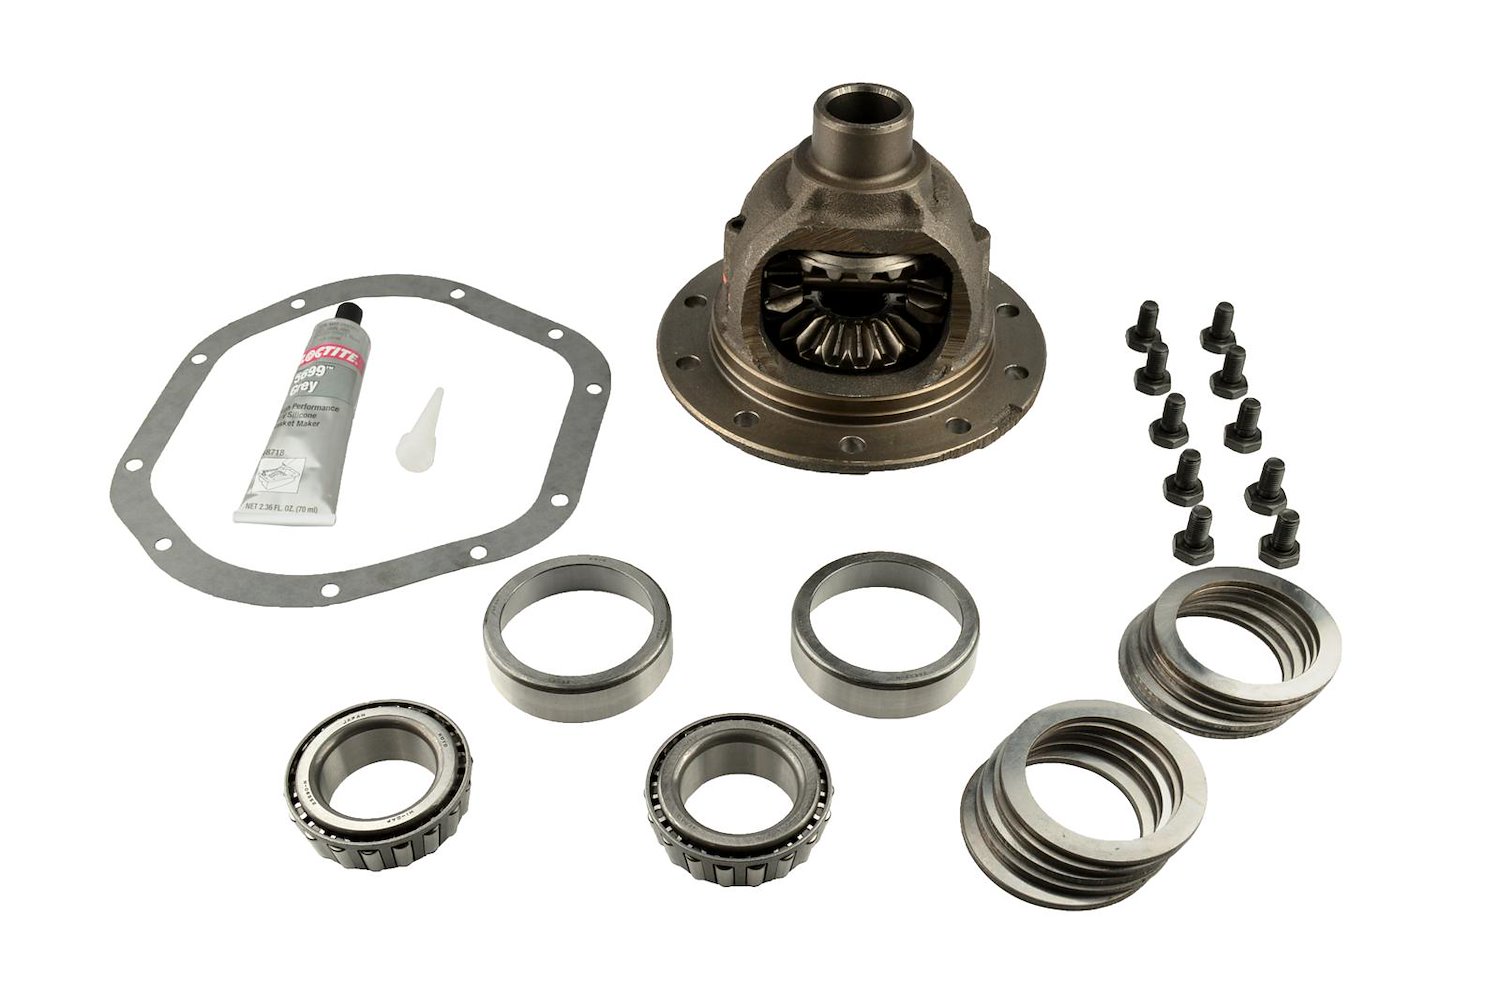 SPICER DIFFERENTIAL CARRIER CASE KIT - LOADED ASSY.